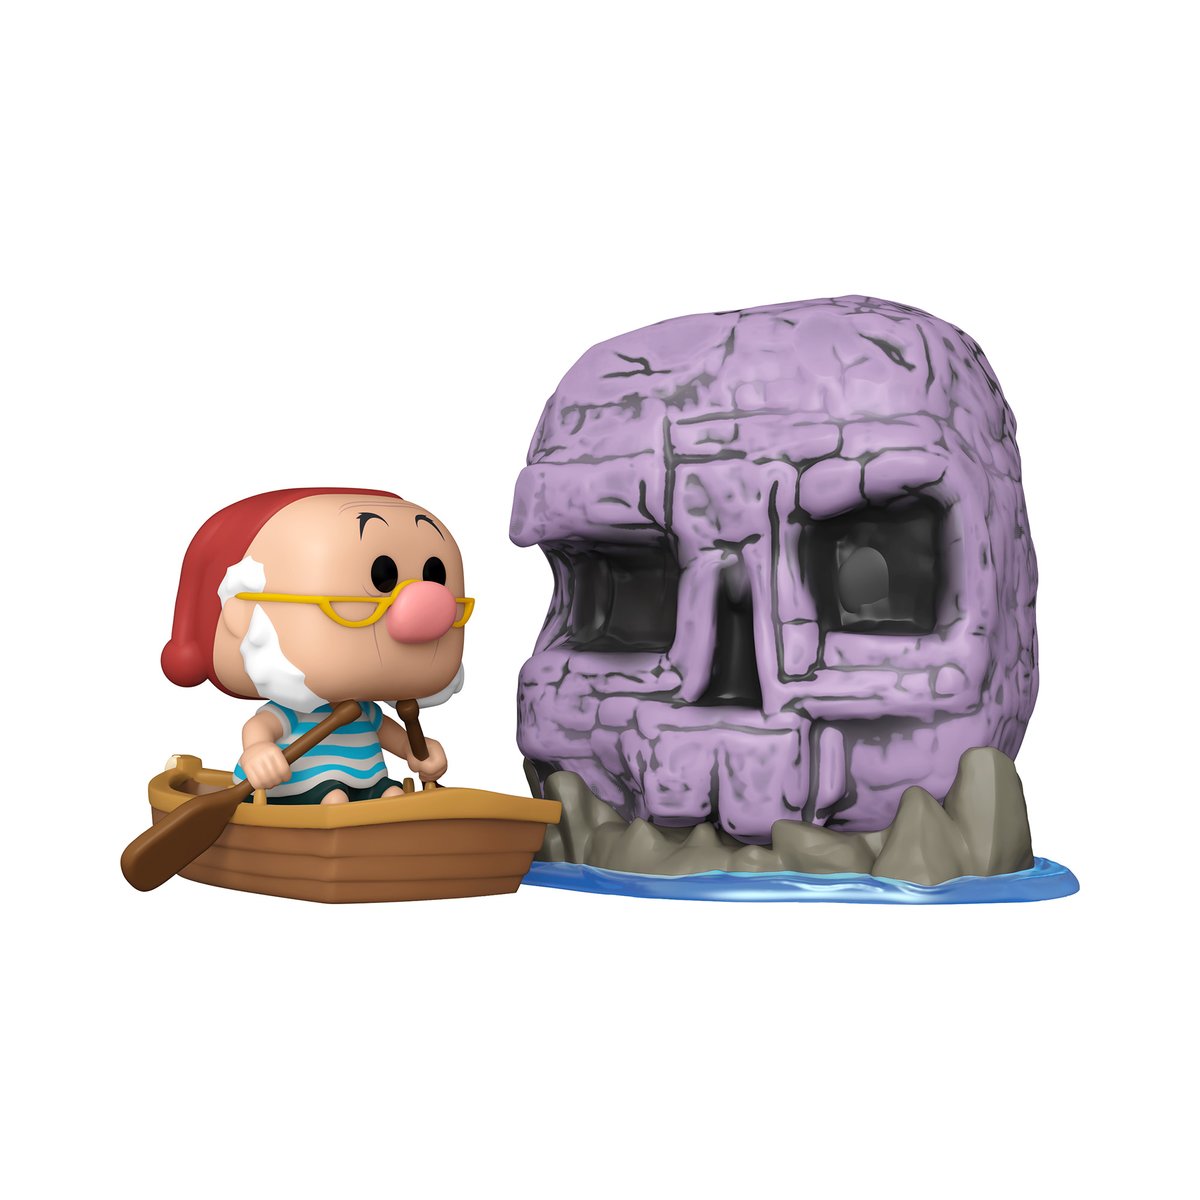 RT and follow @OriginalFunko for the chance to WIN the #NYCC exclusive Smee with Skull Rock POP! Town. #Funko #FunkoPOP #Giveaway #NYCC2022 #FunkoNYCC @NY_Comic_Con